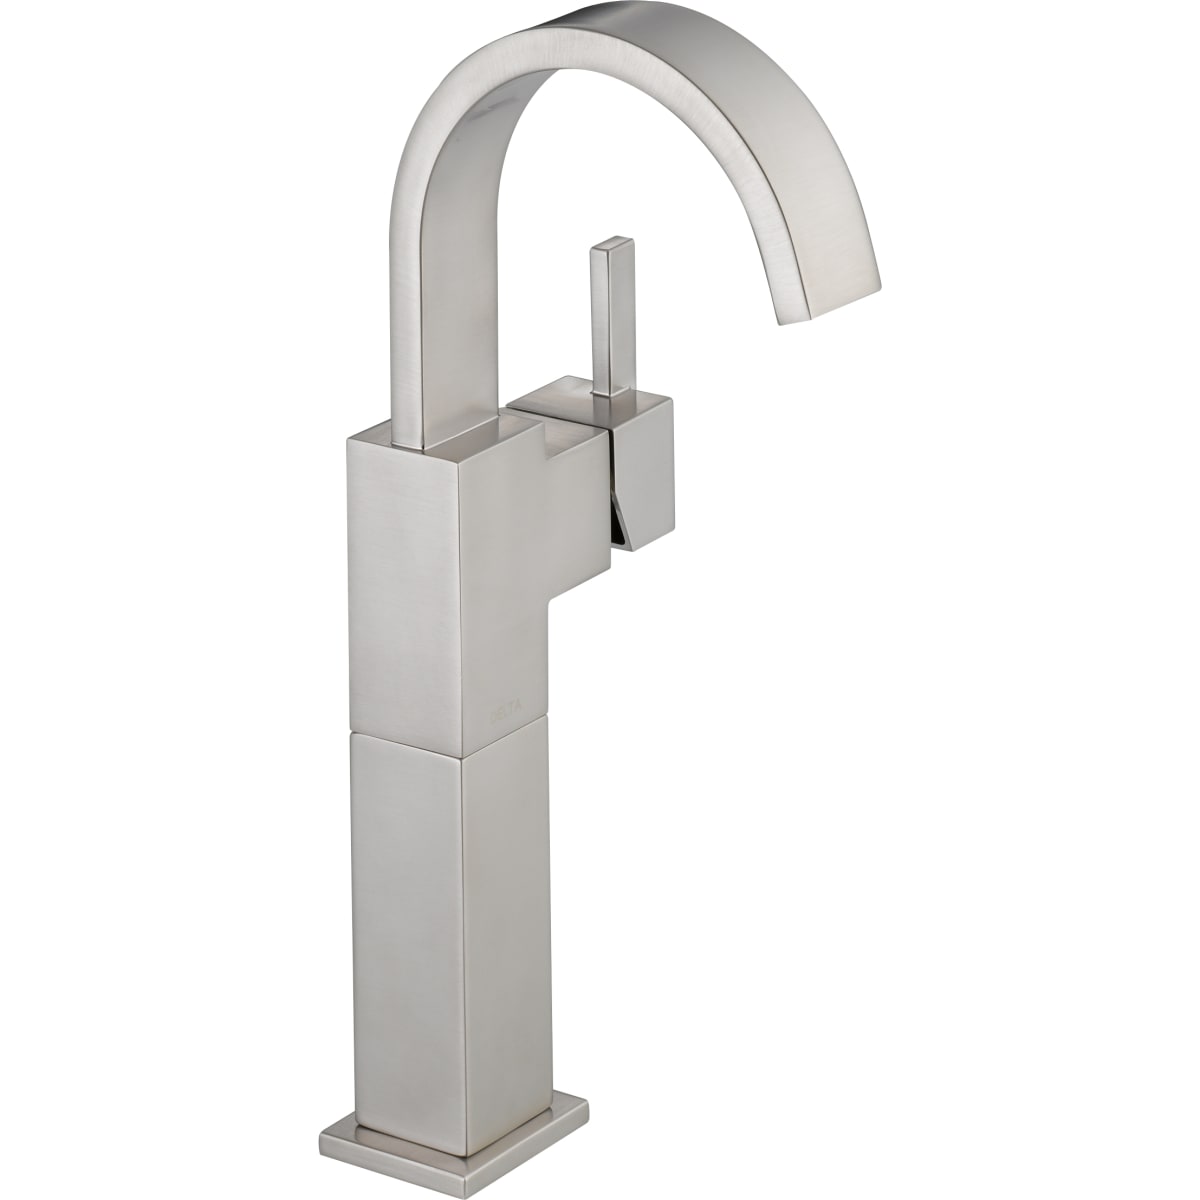 Delta Faucet 77736-SS Vero Double Robe Hook, Brilliance Stainless Steel